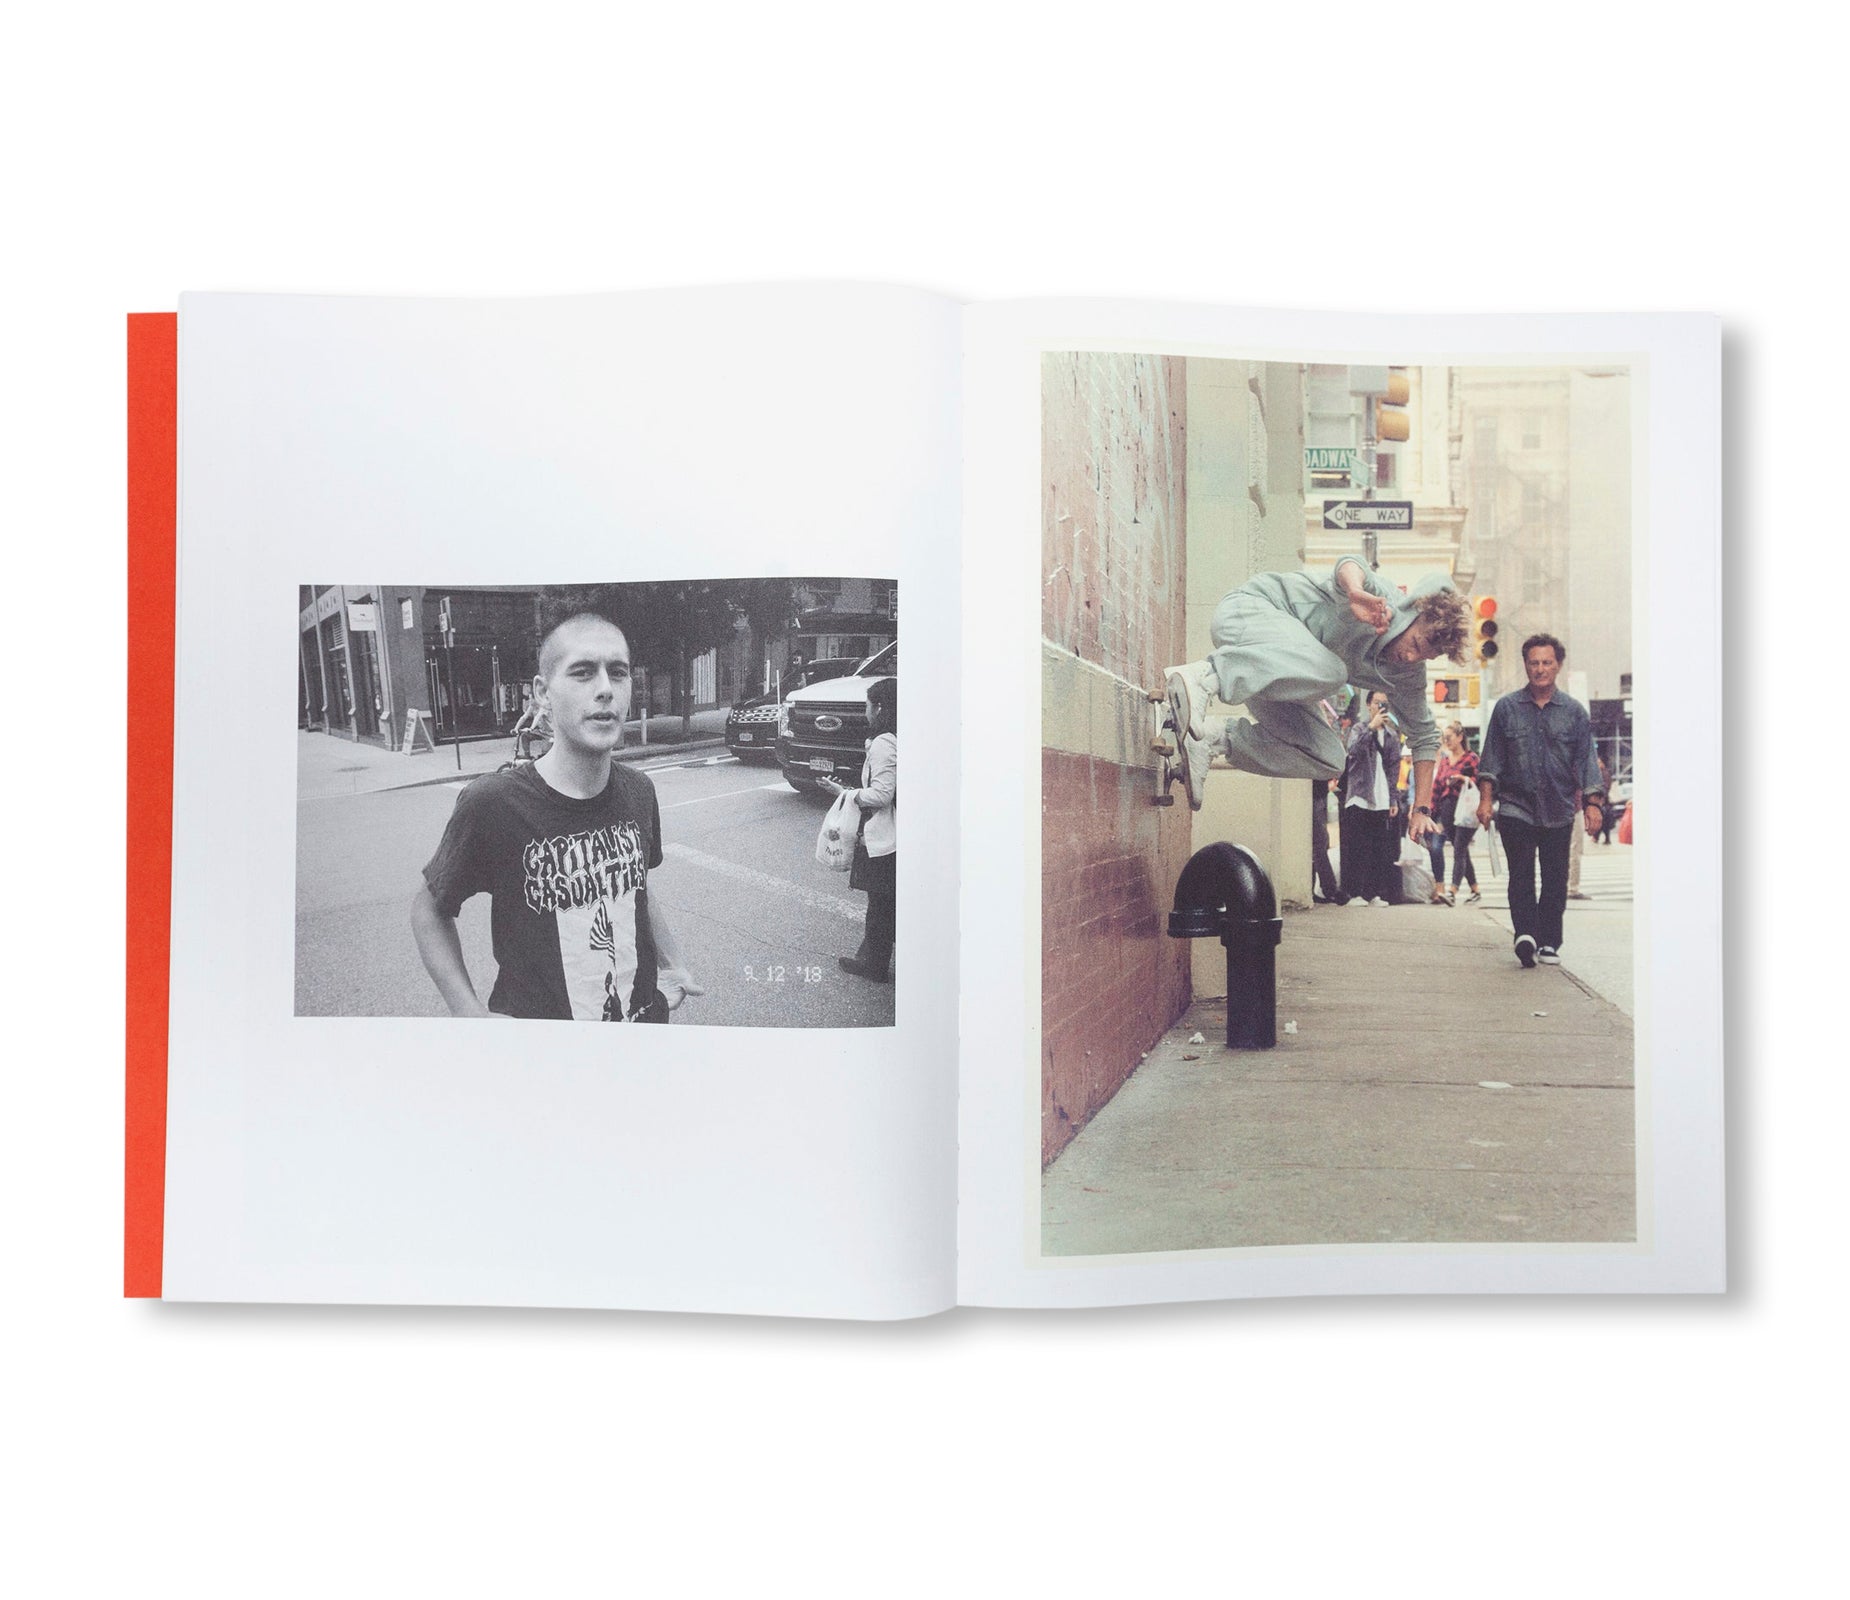 THANK YOU FOR YOUR BUSINESS by Quentin de Briey [SPECIAL EDITION]